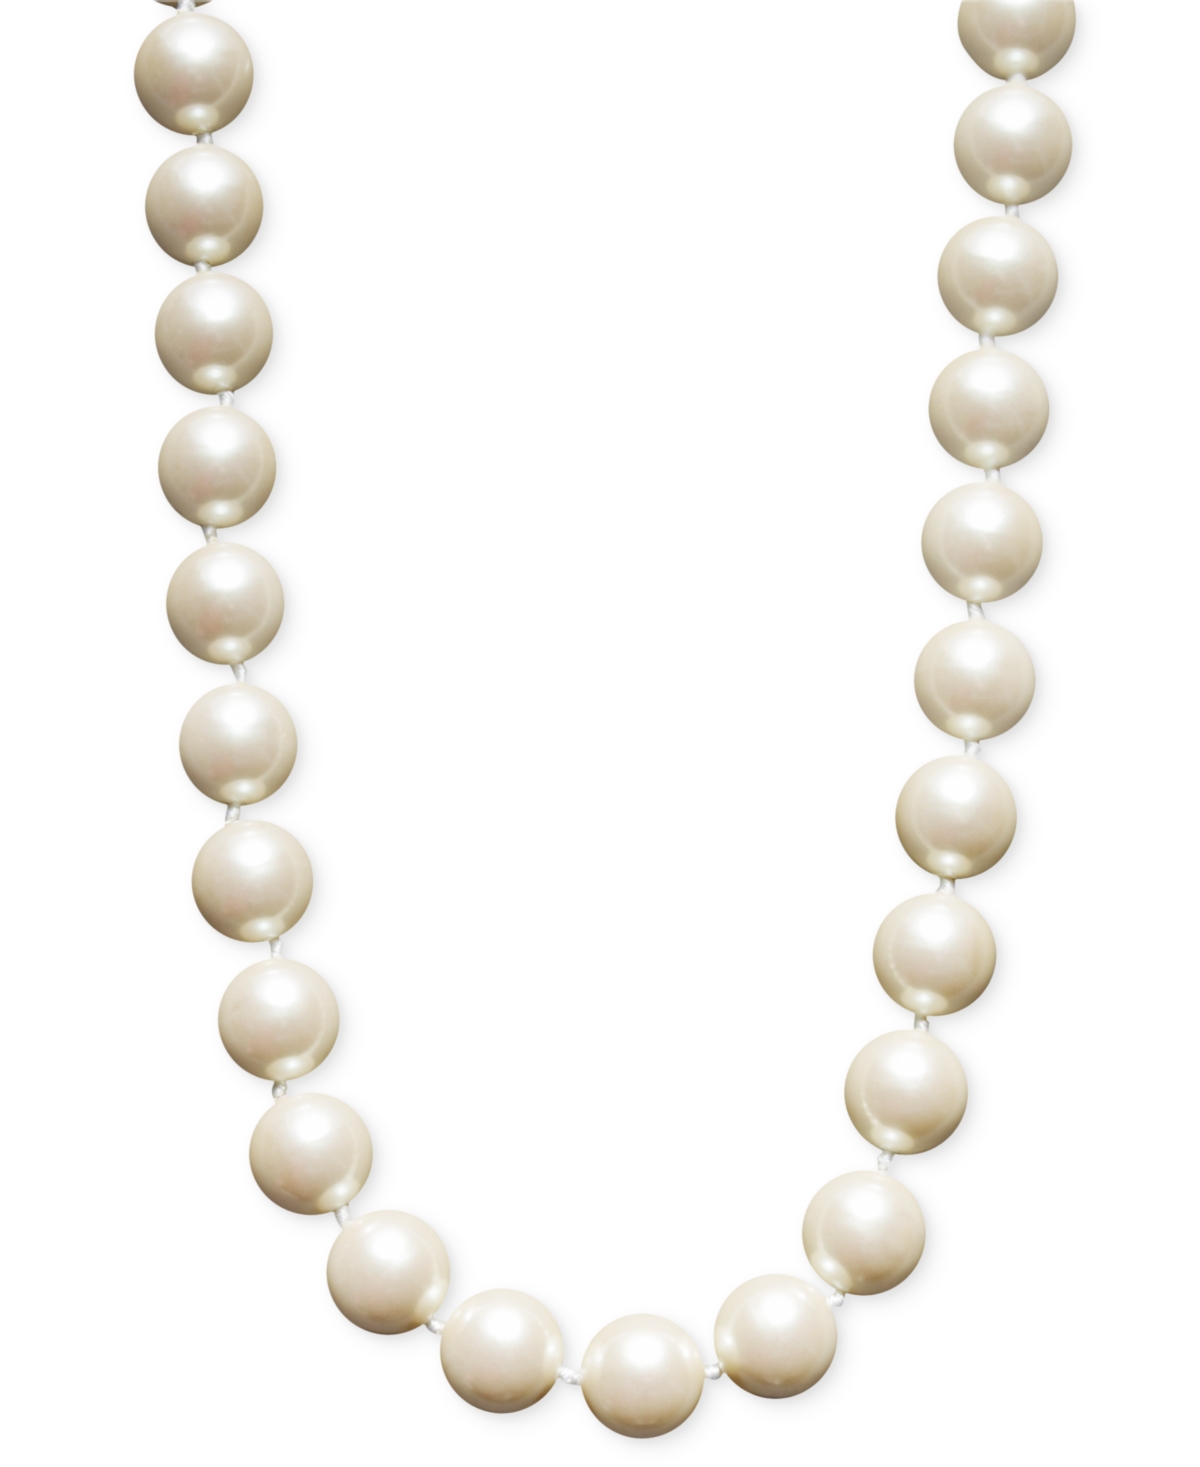 Imitation 14mm Pearl Collar Necklace, Created for Macy's - White